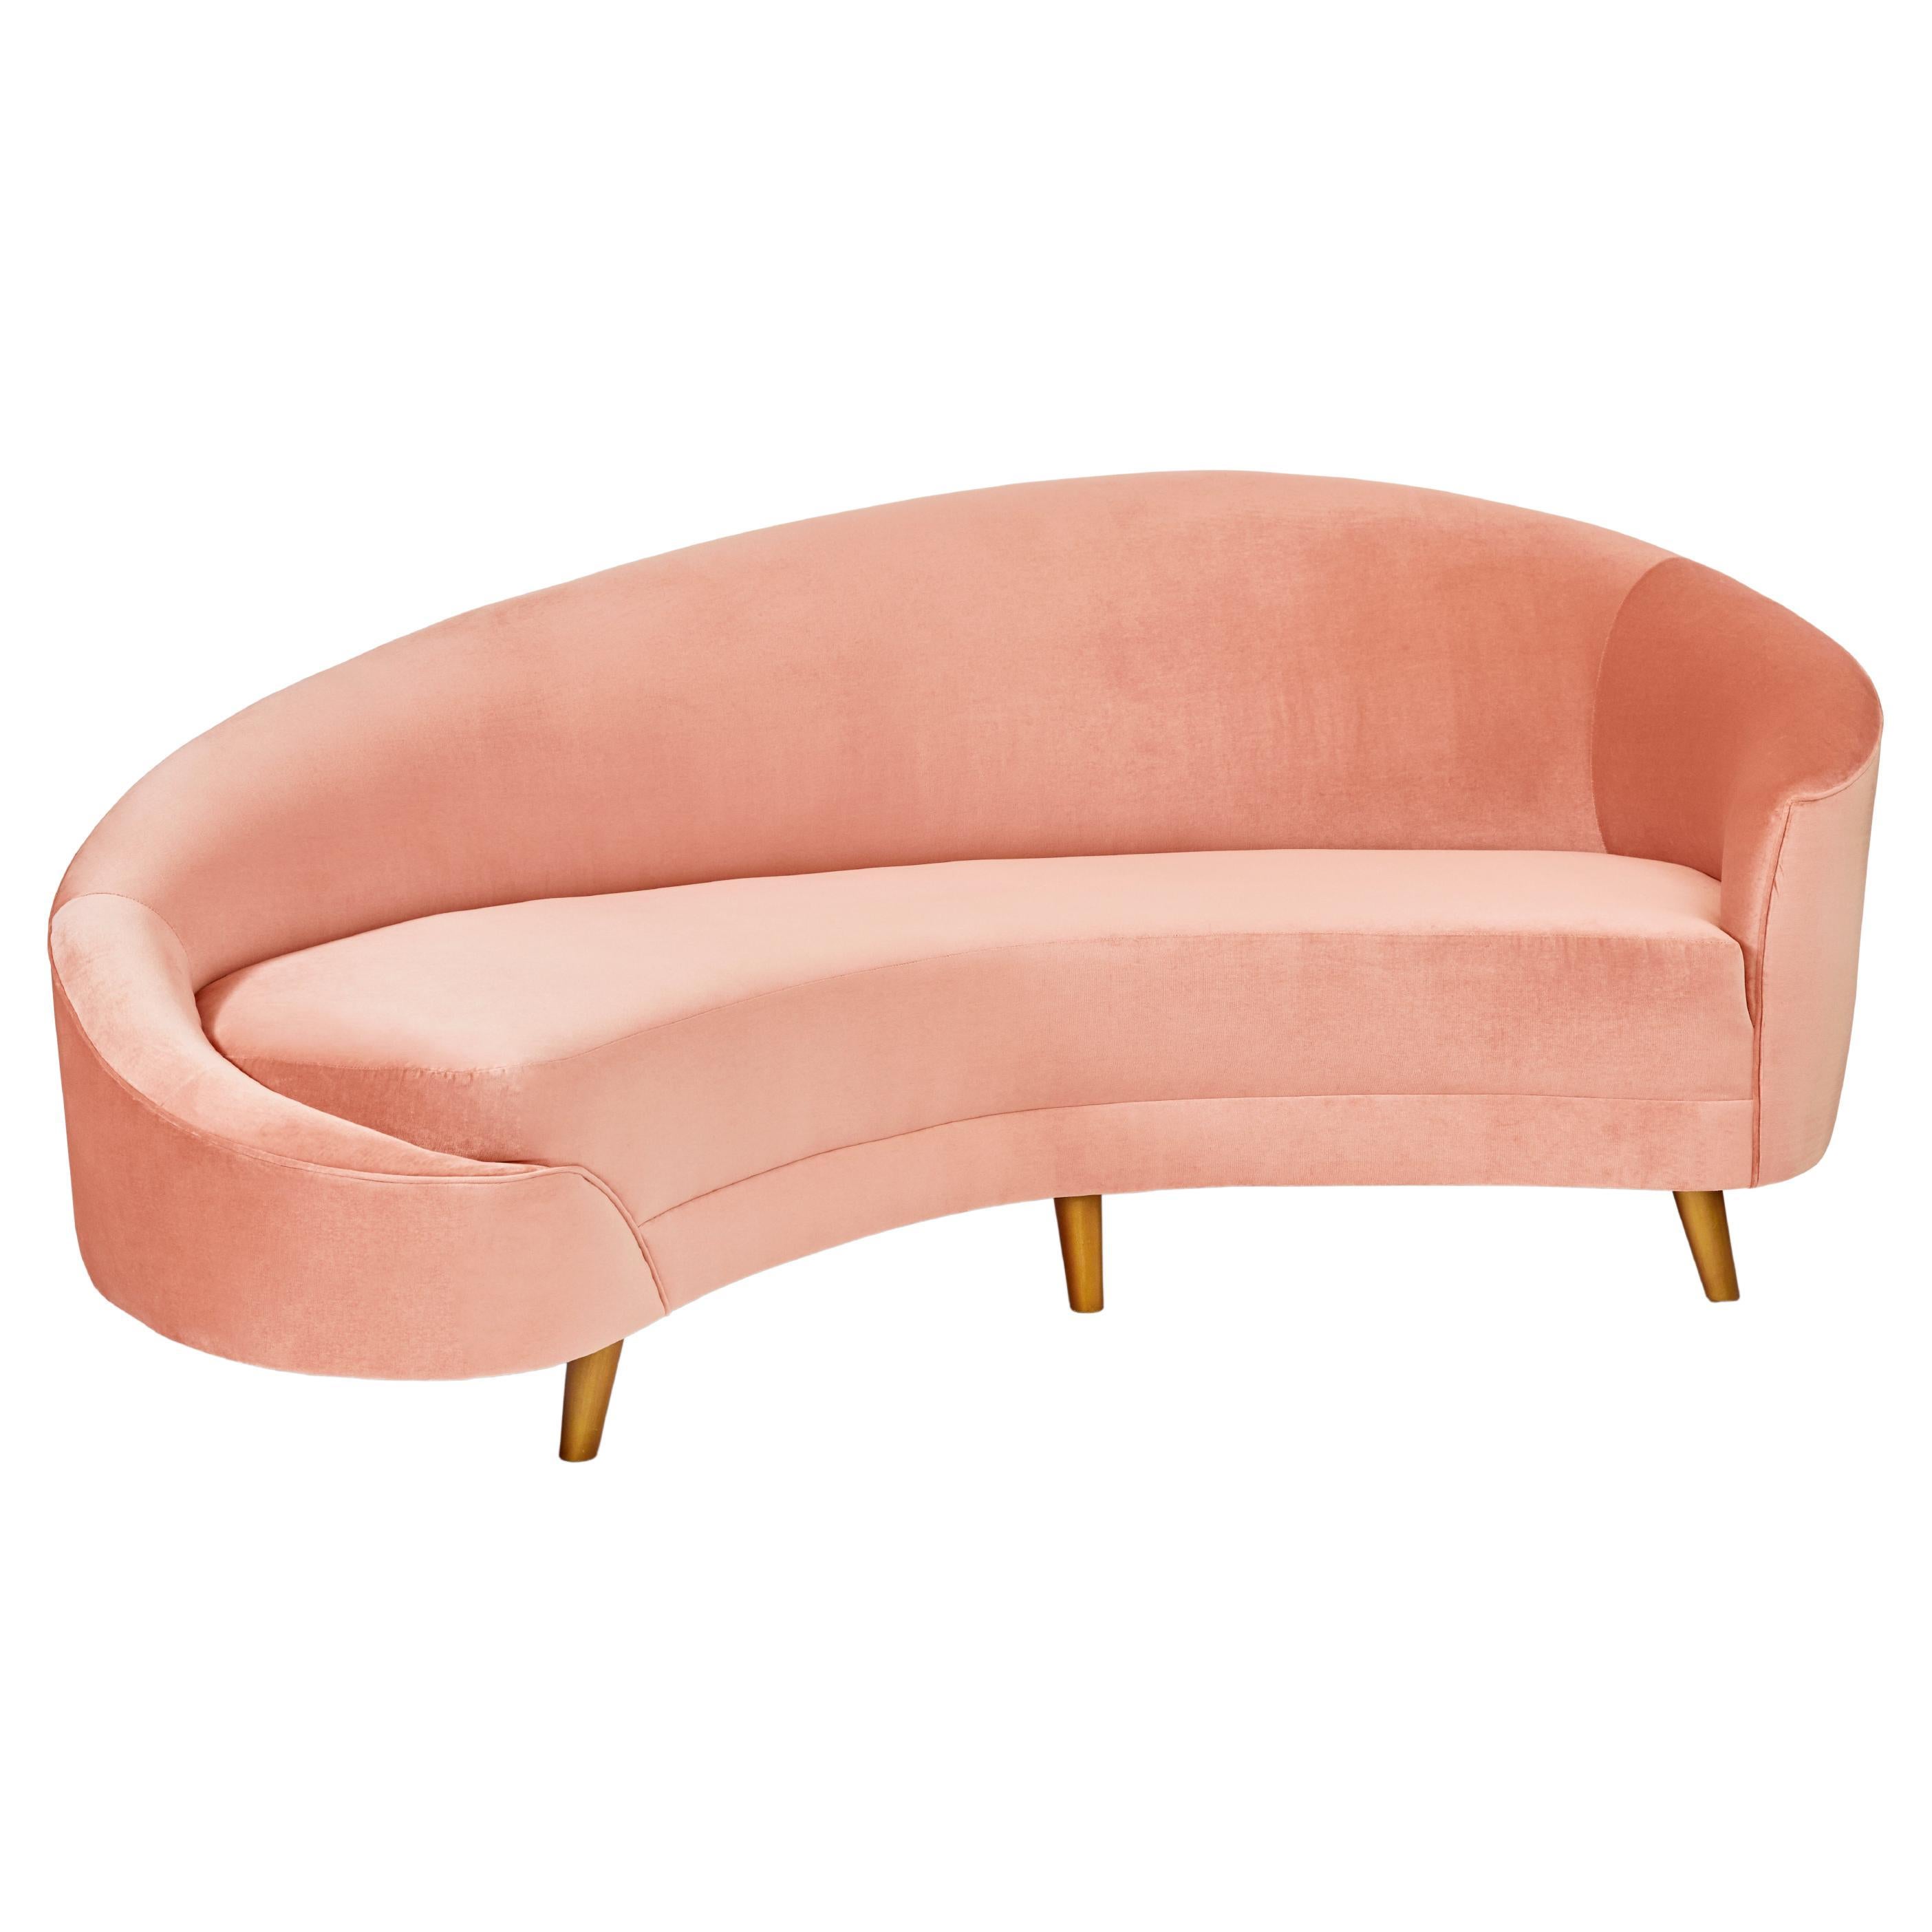 Contemporary Melodia Curved Sofa Handcrafted by James by Jimmy Delaurentis For Sale